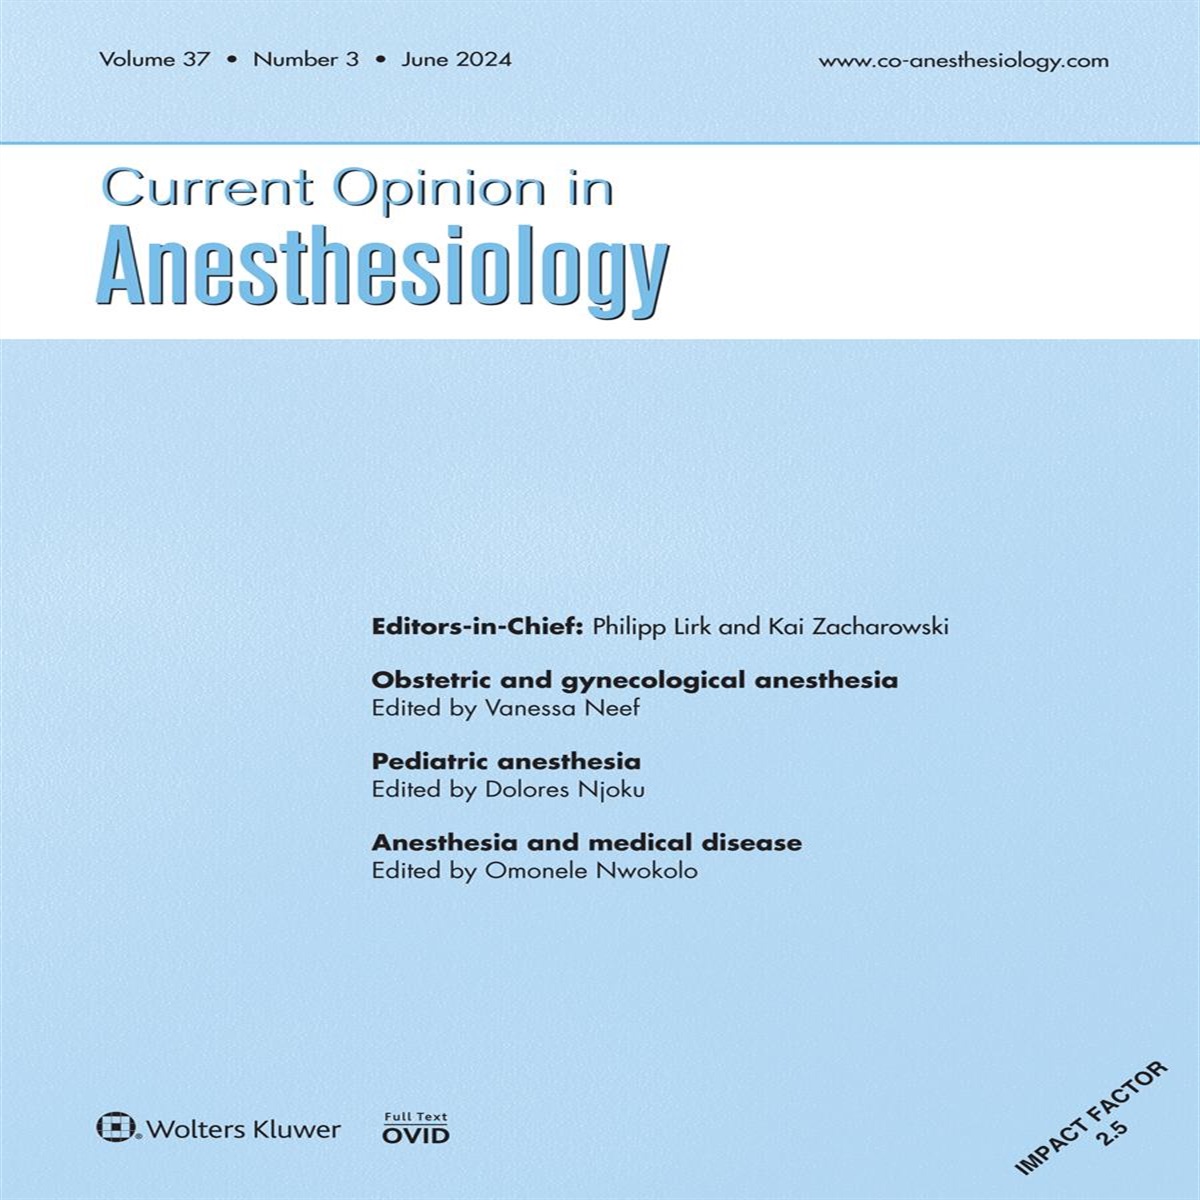 Strategies to increase patient safety in obstetric anesthesia